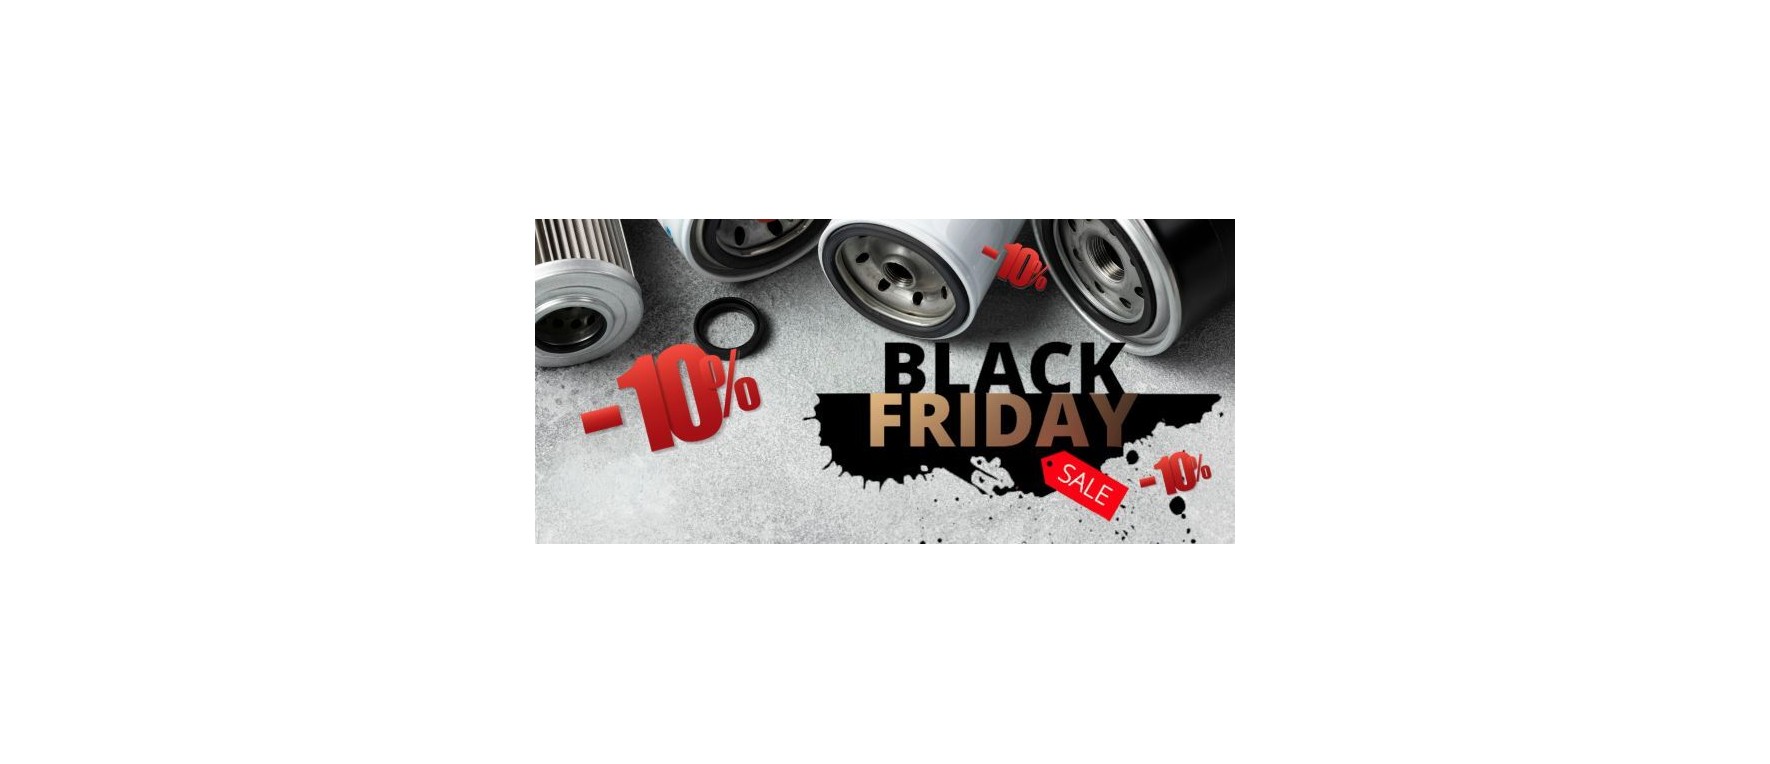 10% discount on filters